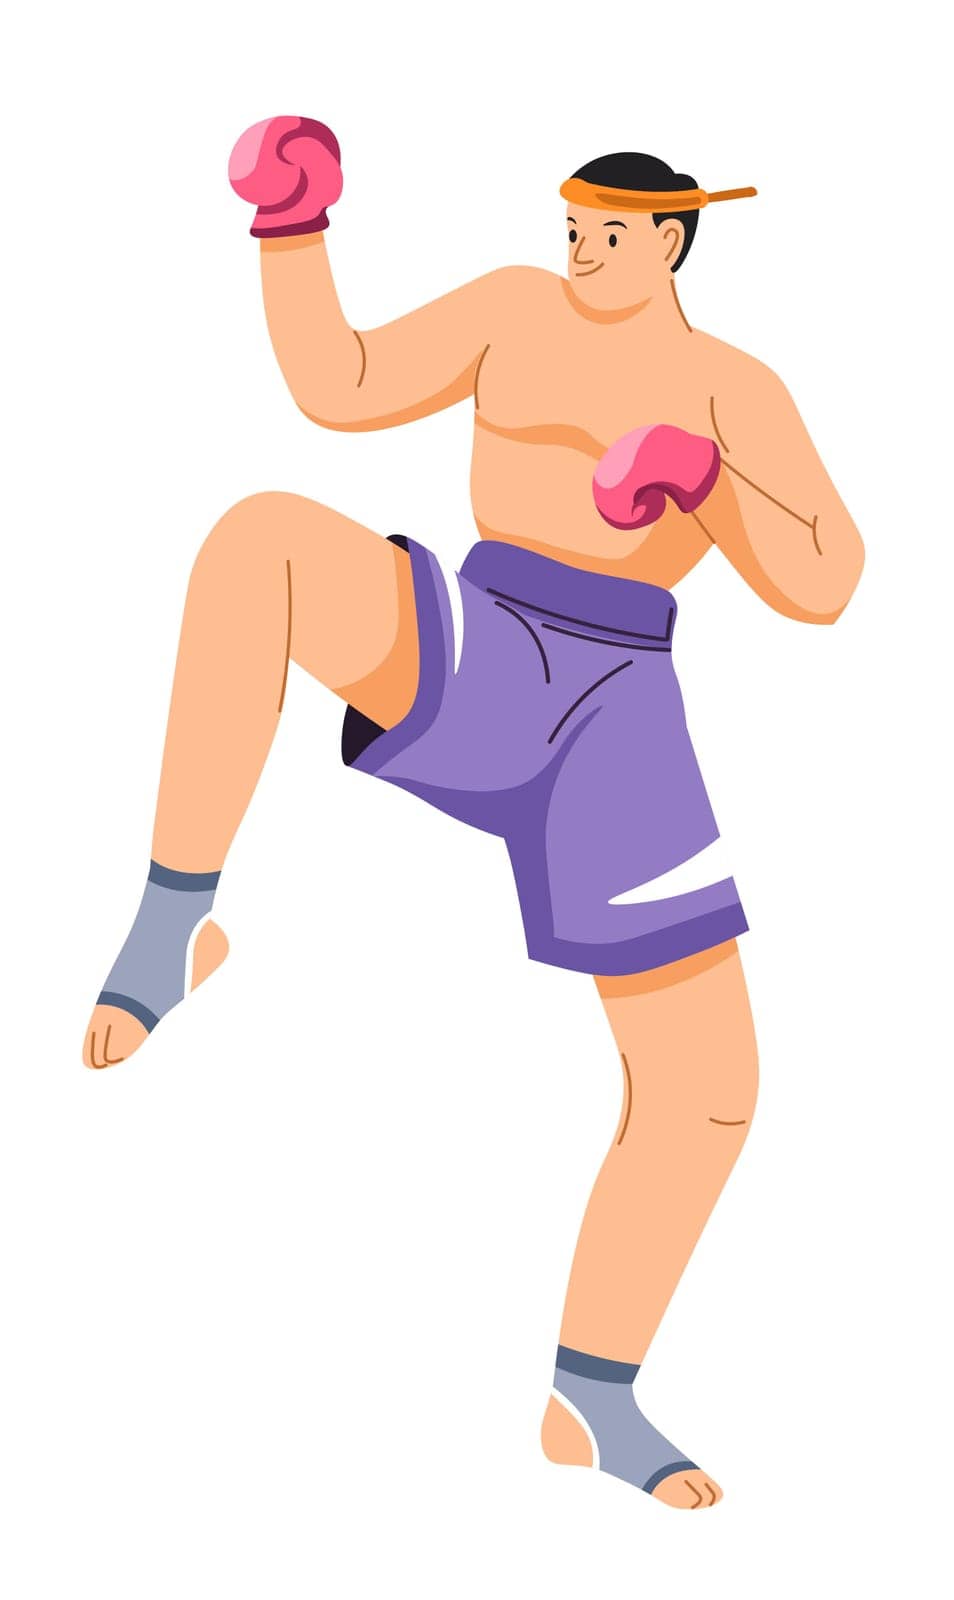 Sportsman wearing protective gloves for hands, band on head, shorts and support for feet. Thai boxer or fighter training and working out for competition or sporting event. Vector in flat style